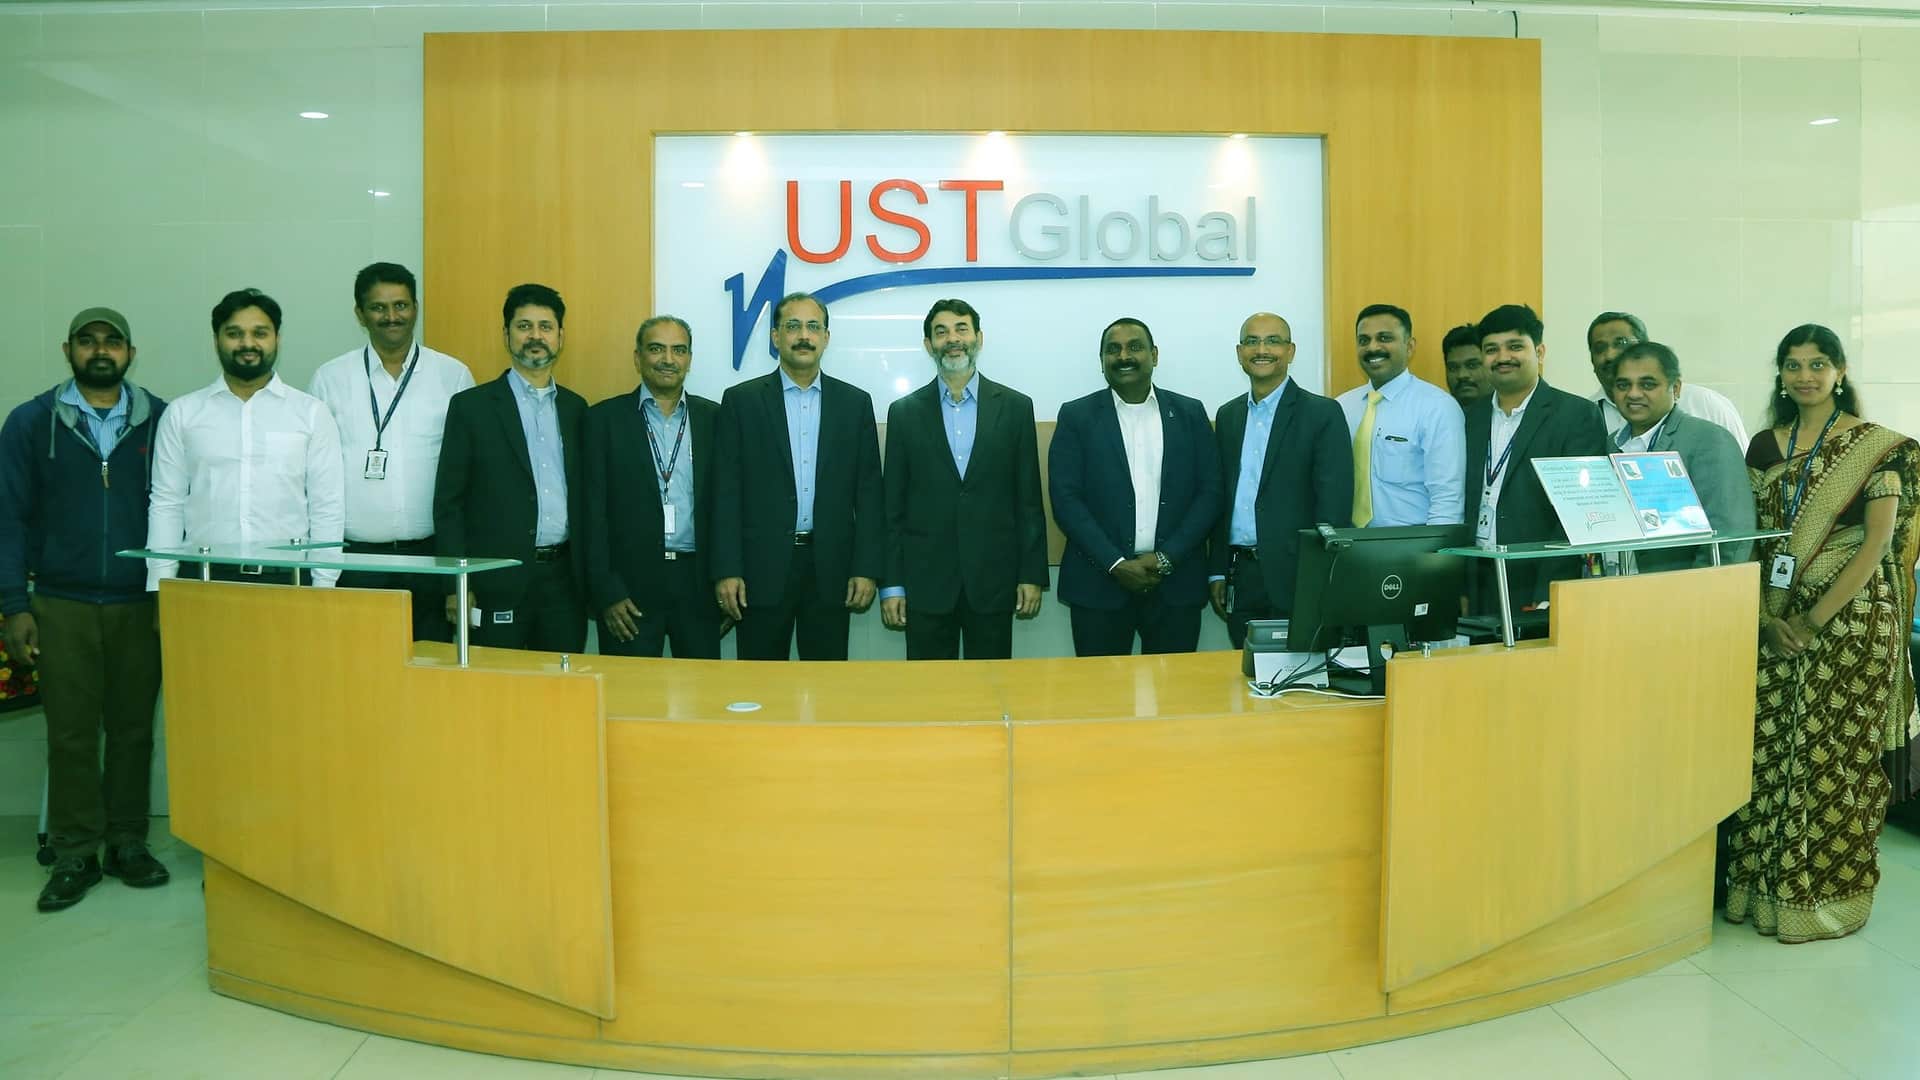 Tech company UST to hire 6,000 employees for Bengaluru centre in 2 yrs